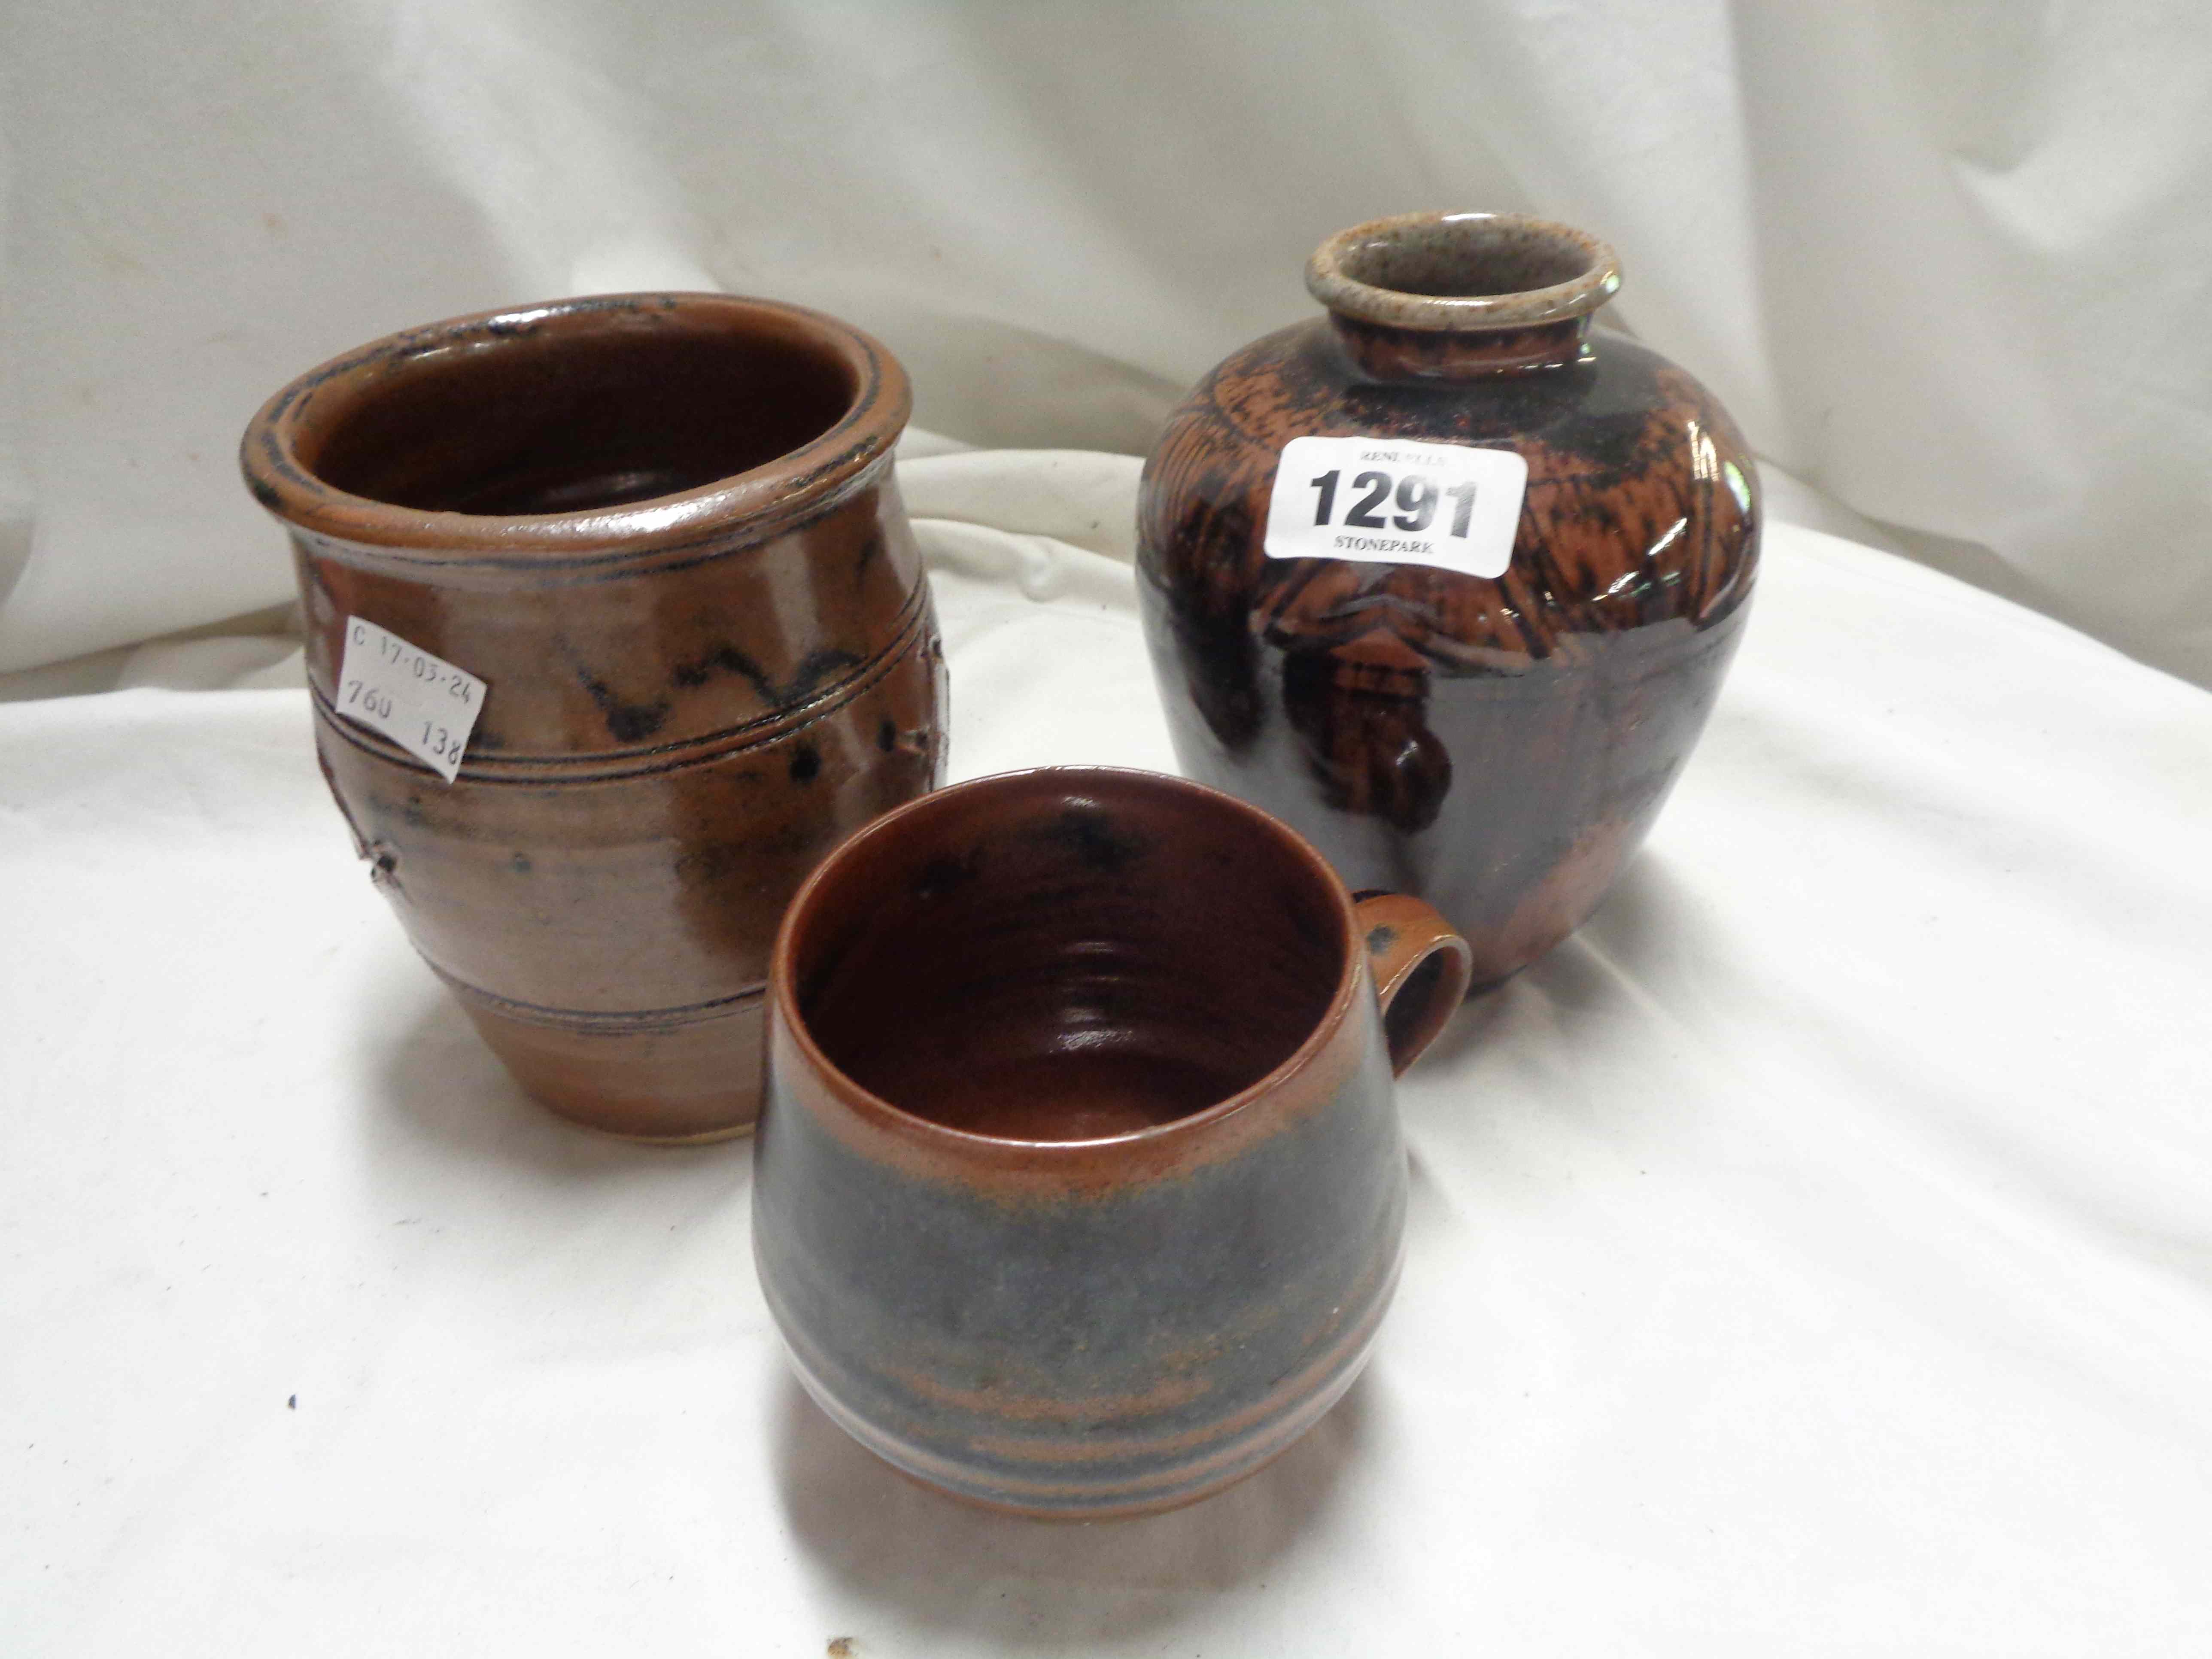 A Jeremy Leach Studio Pottery vase - sold with another Studio Pottery vase and a similar mug